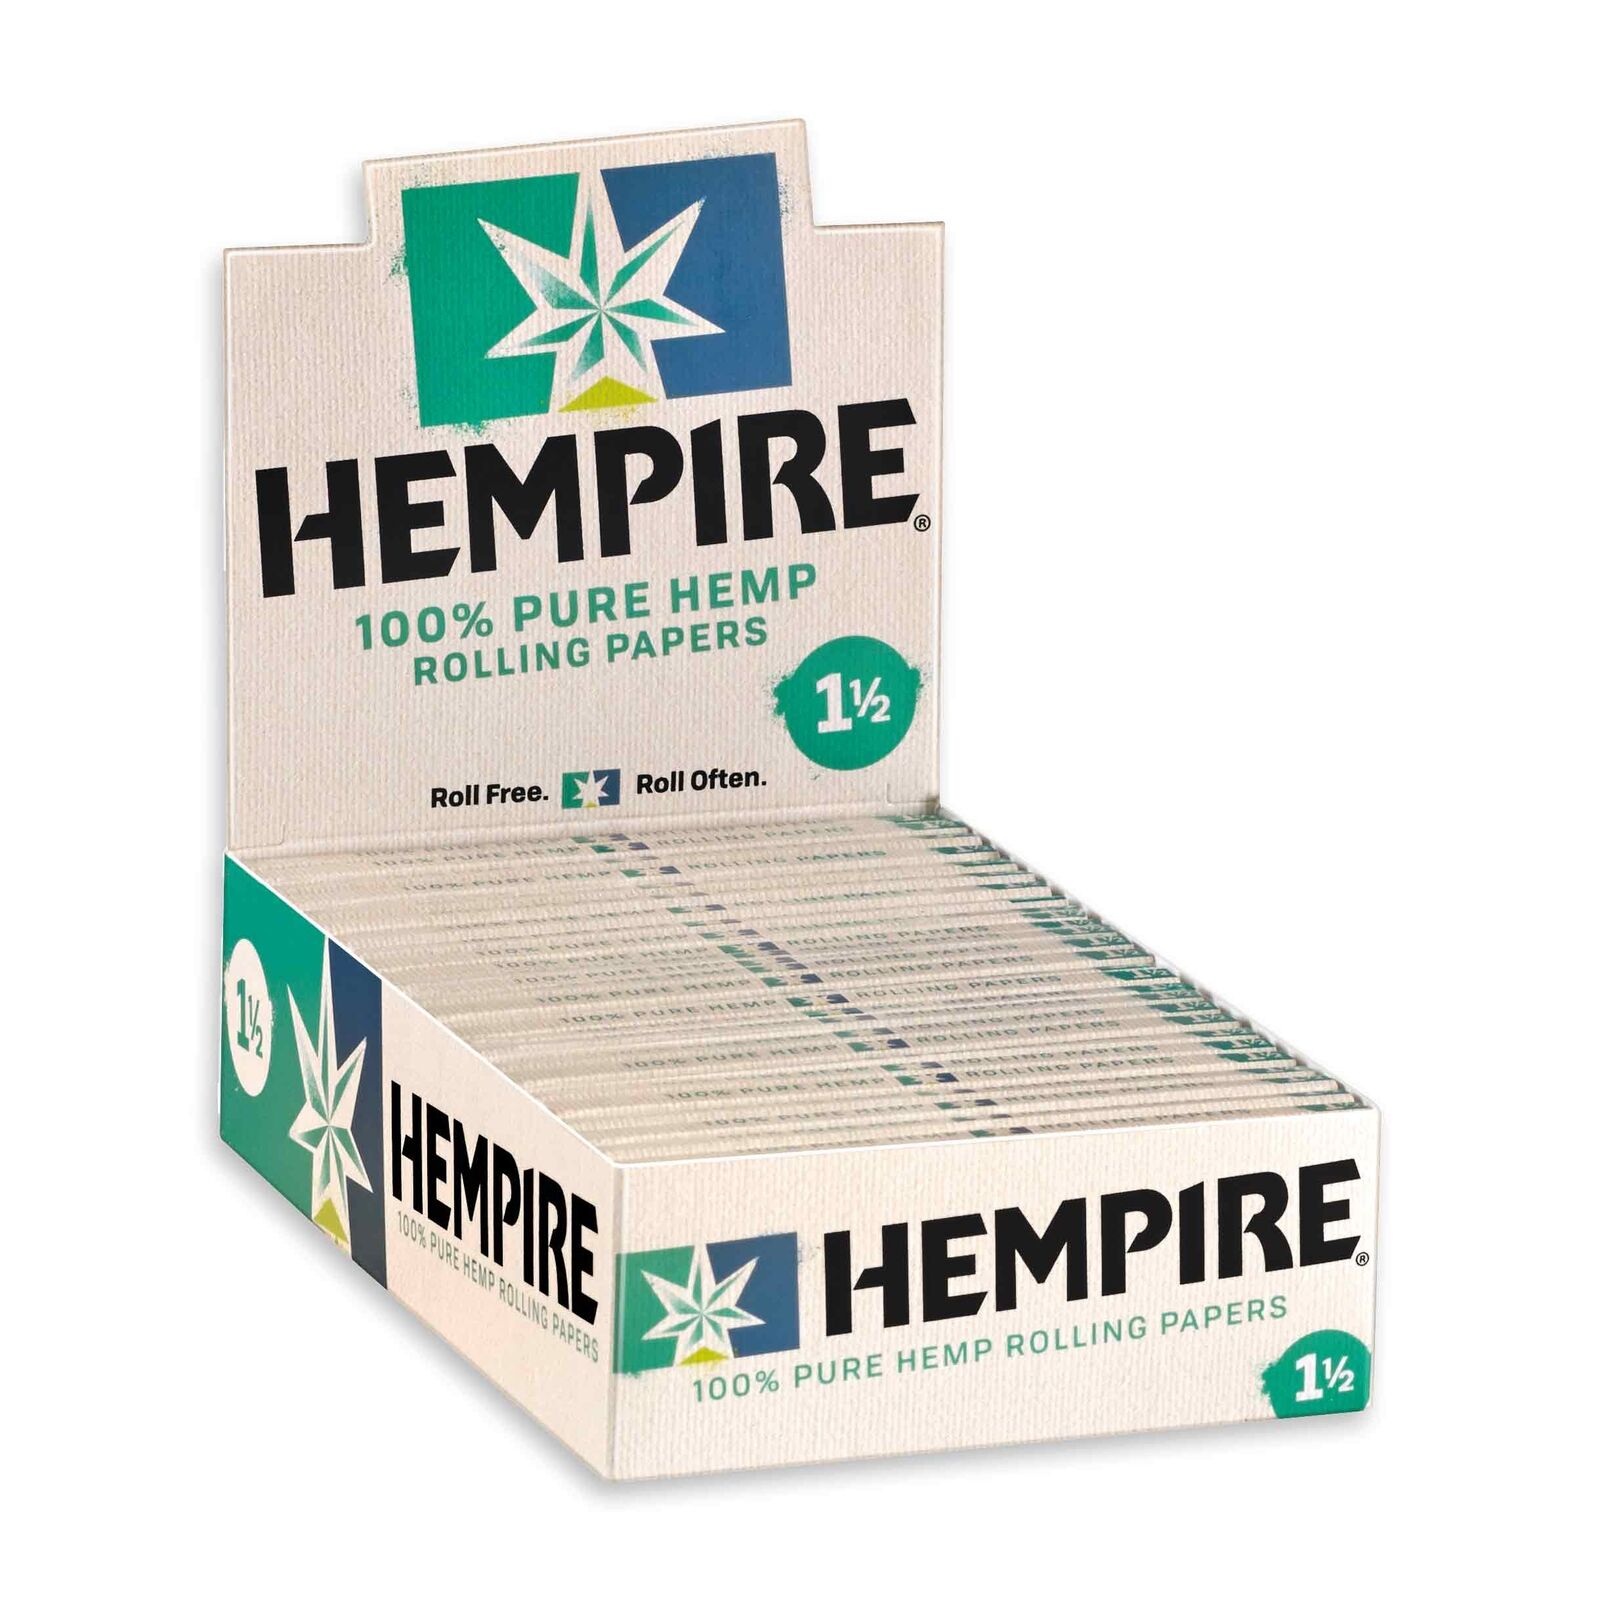 Hempire Rolling Papers 1 1/2 Pure Hemp 1.5 Cigarette Paper (Box of 24 Booklets)